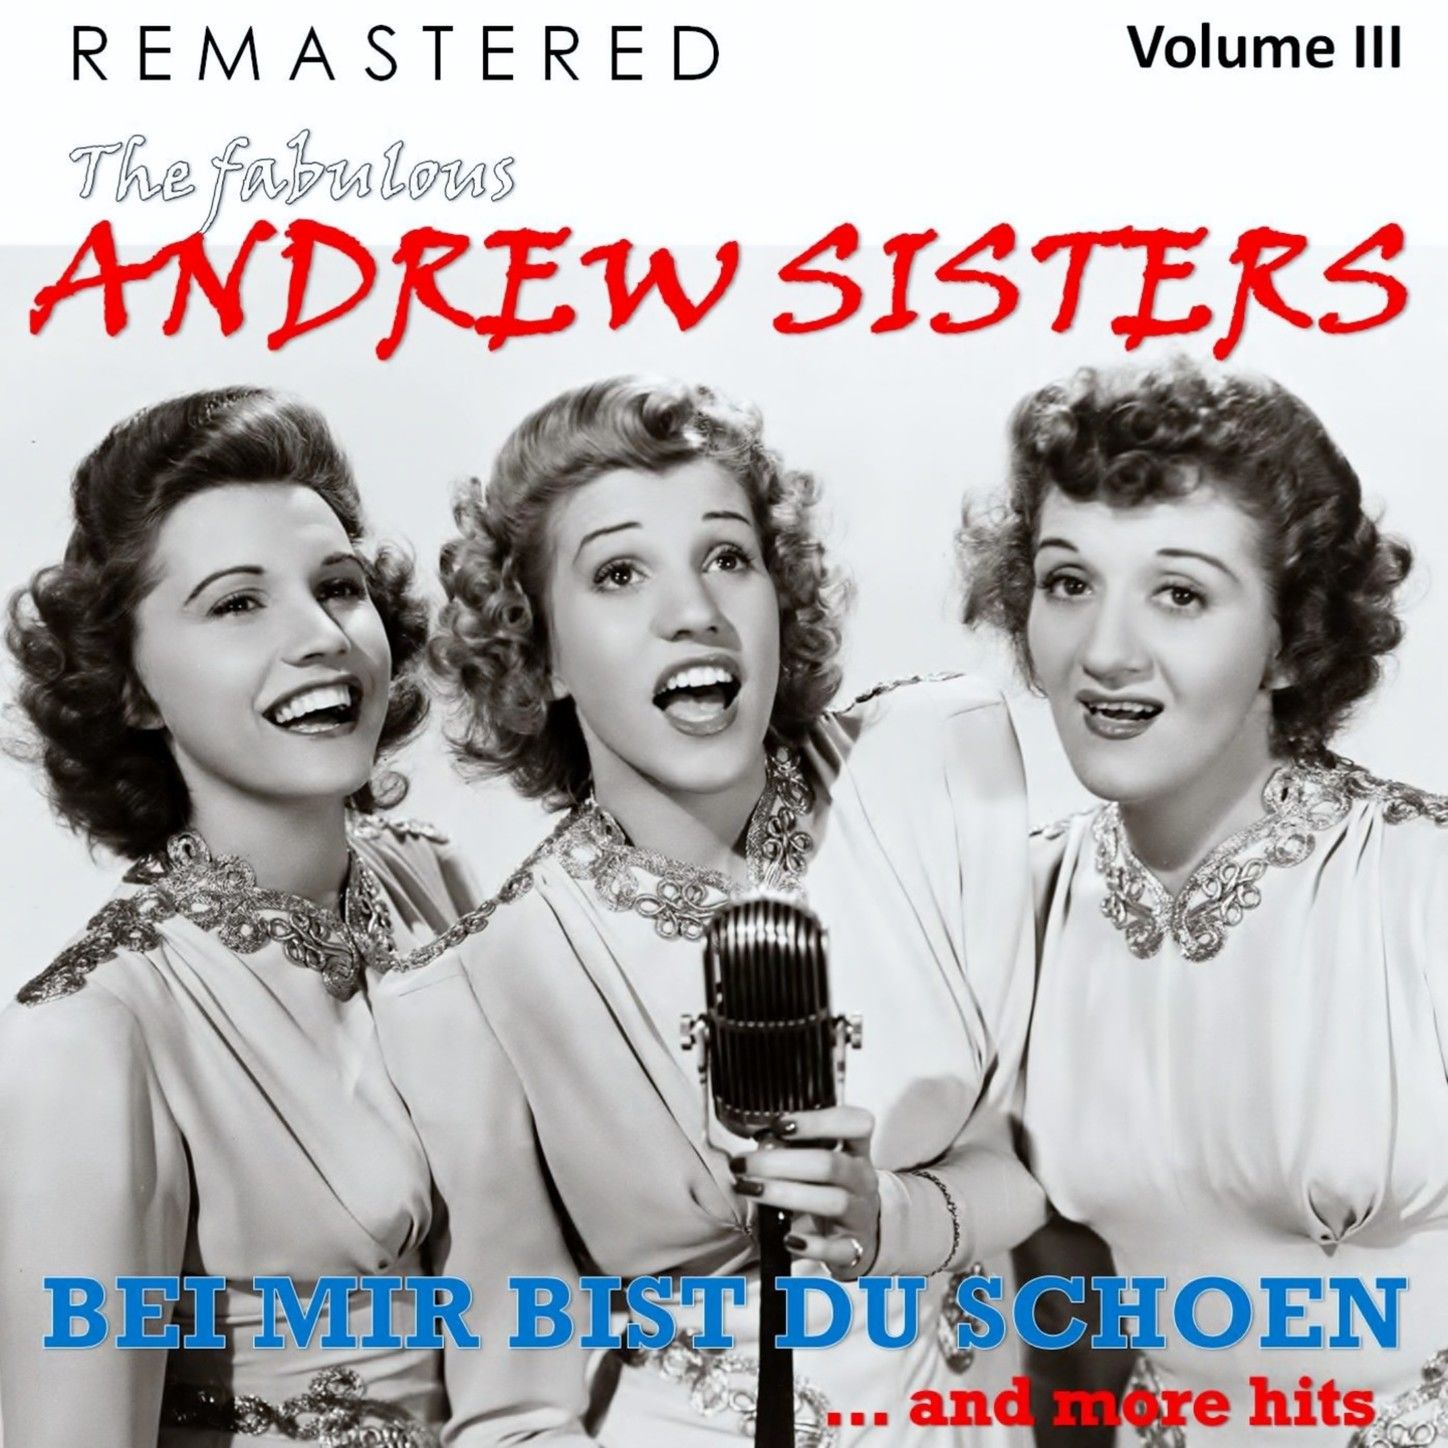 The Fabulous Andrew Sisters, Vol. 3  Bei mir bist du sch n... and More Hits Remastered